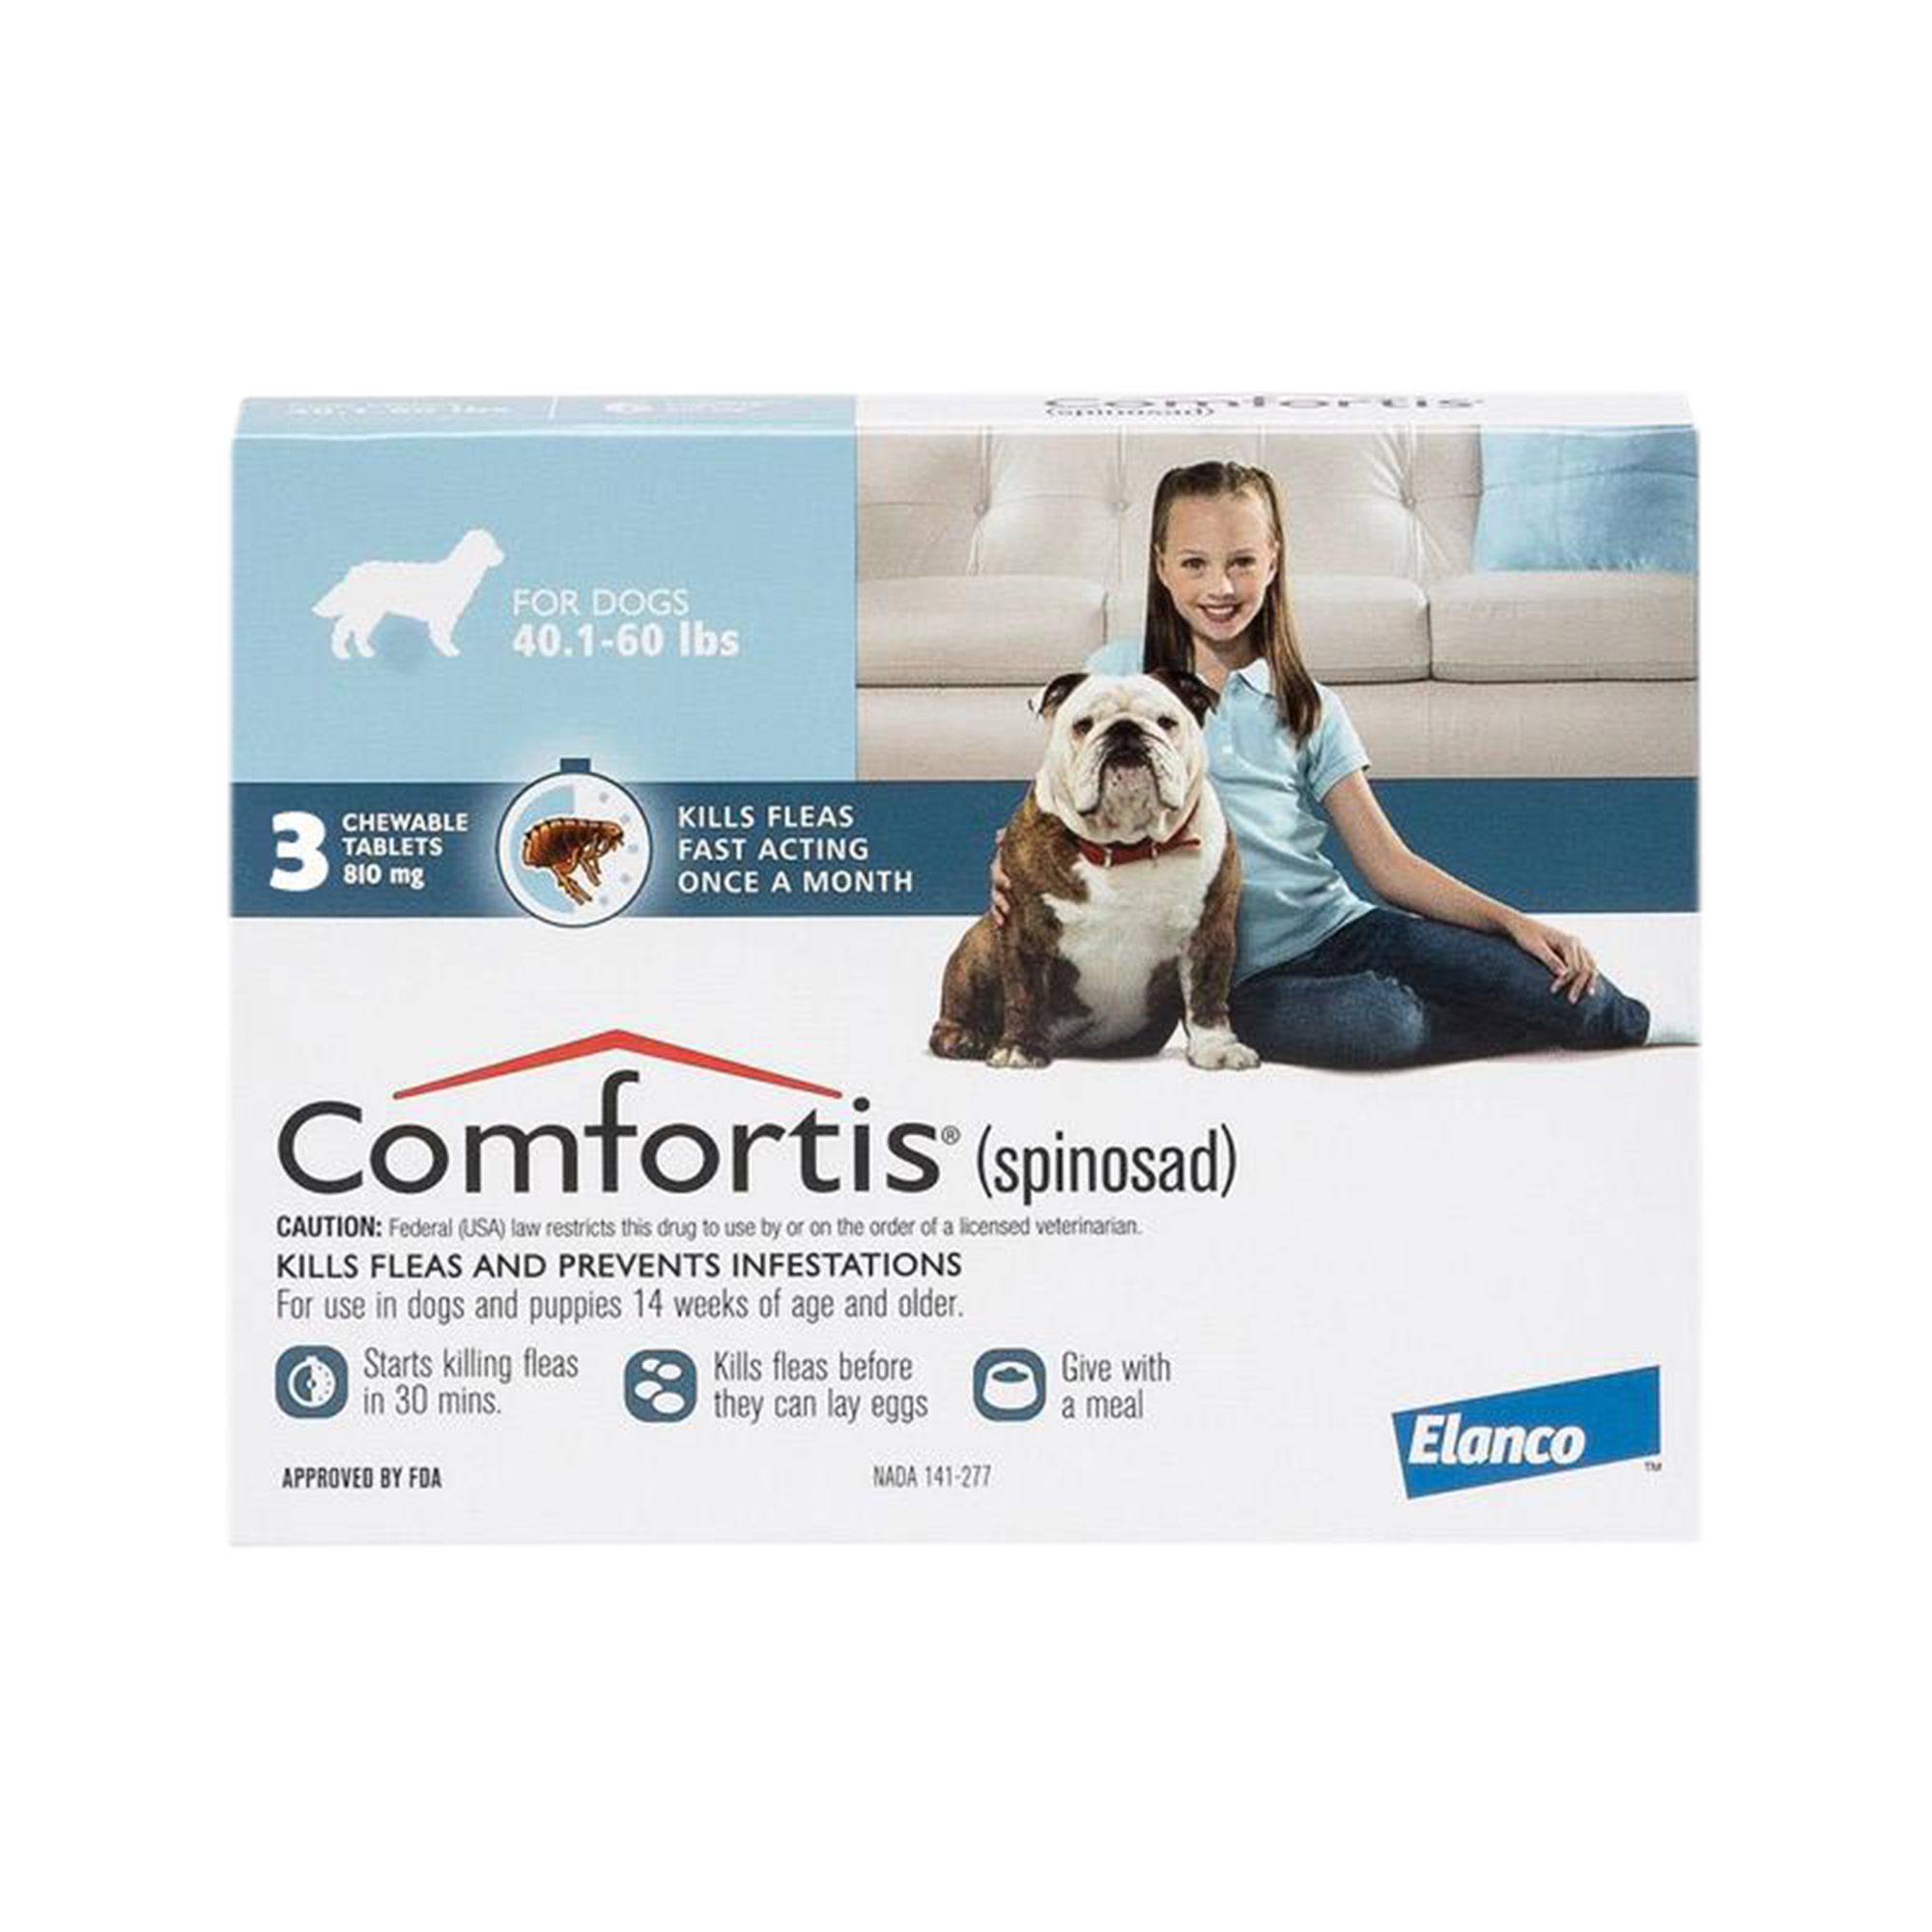 Comfortis Chewable Tablets For Dogs 40 1 60 Lbs Blue 3 6 Or 12 Month Supply Pharmacy Flea Tick Petsmart